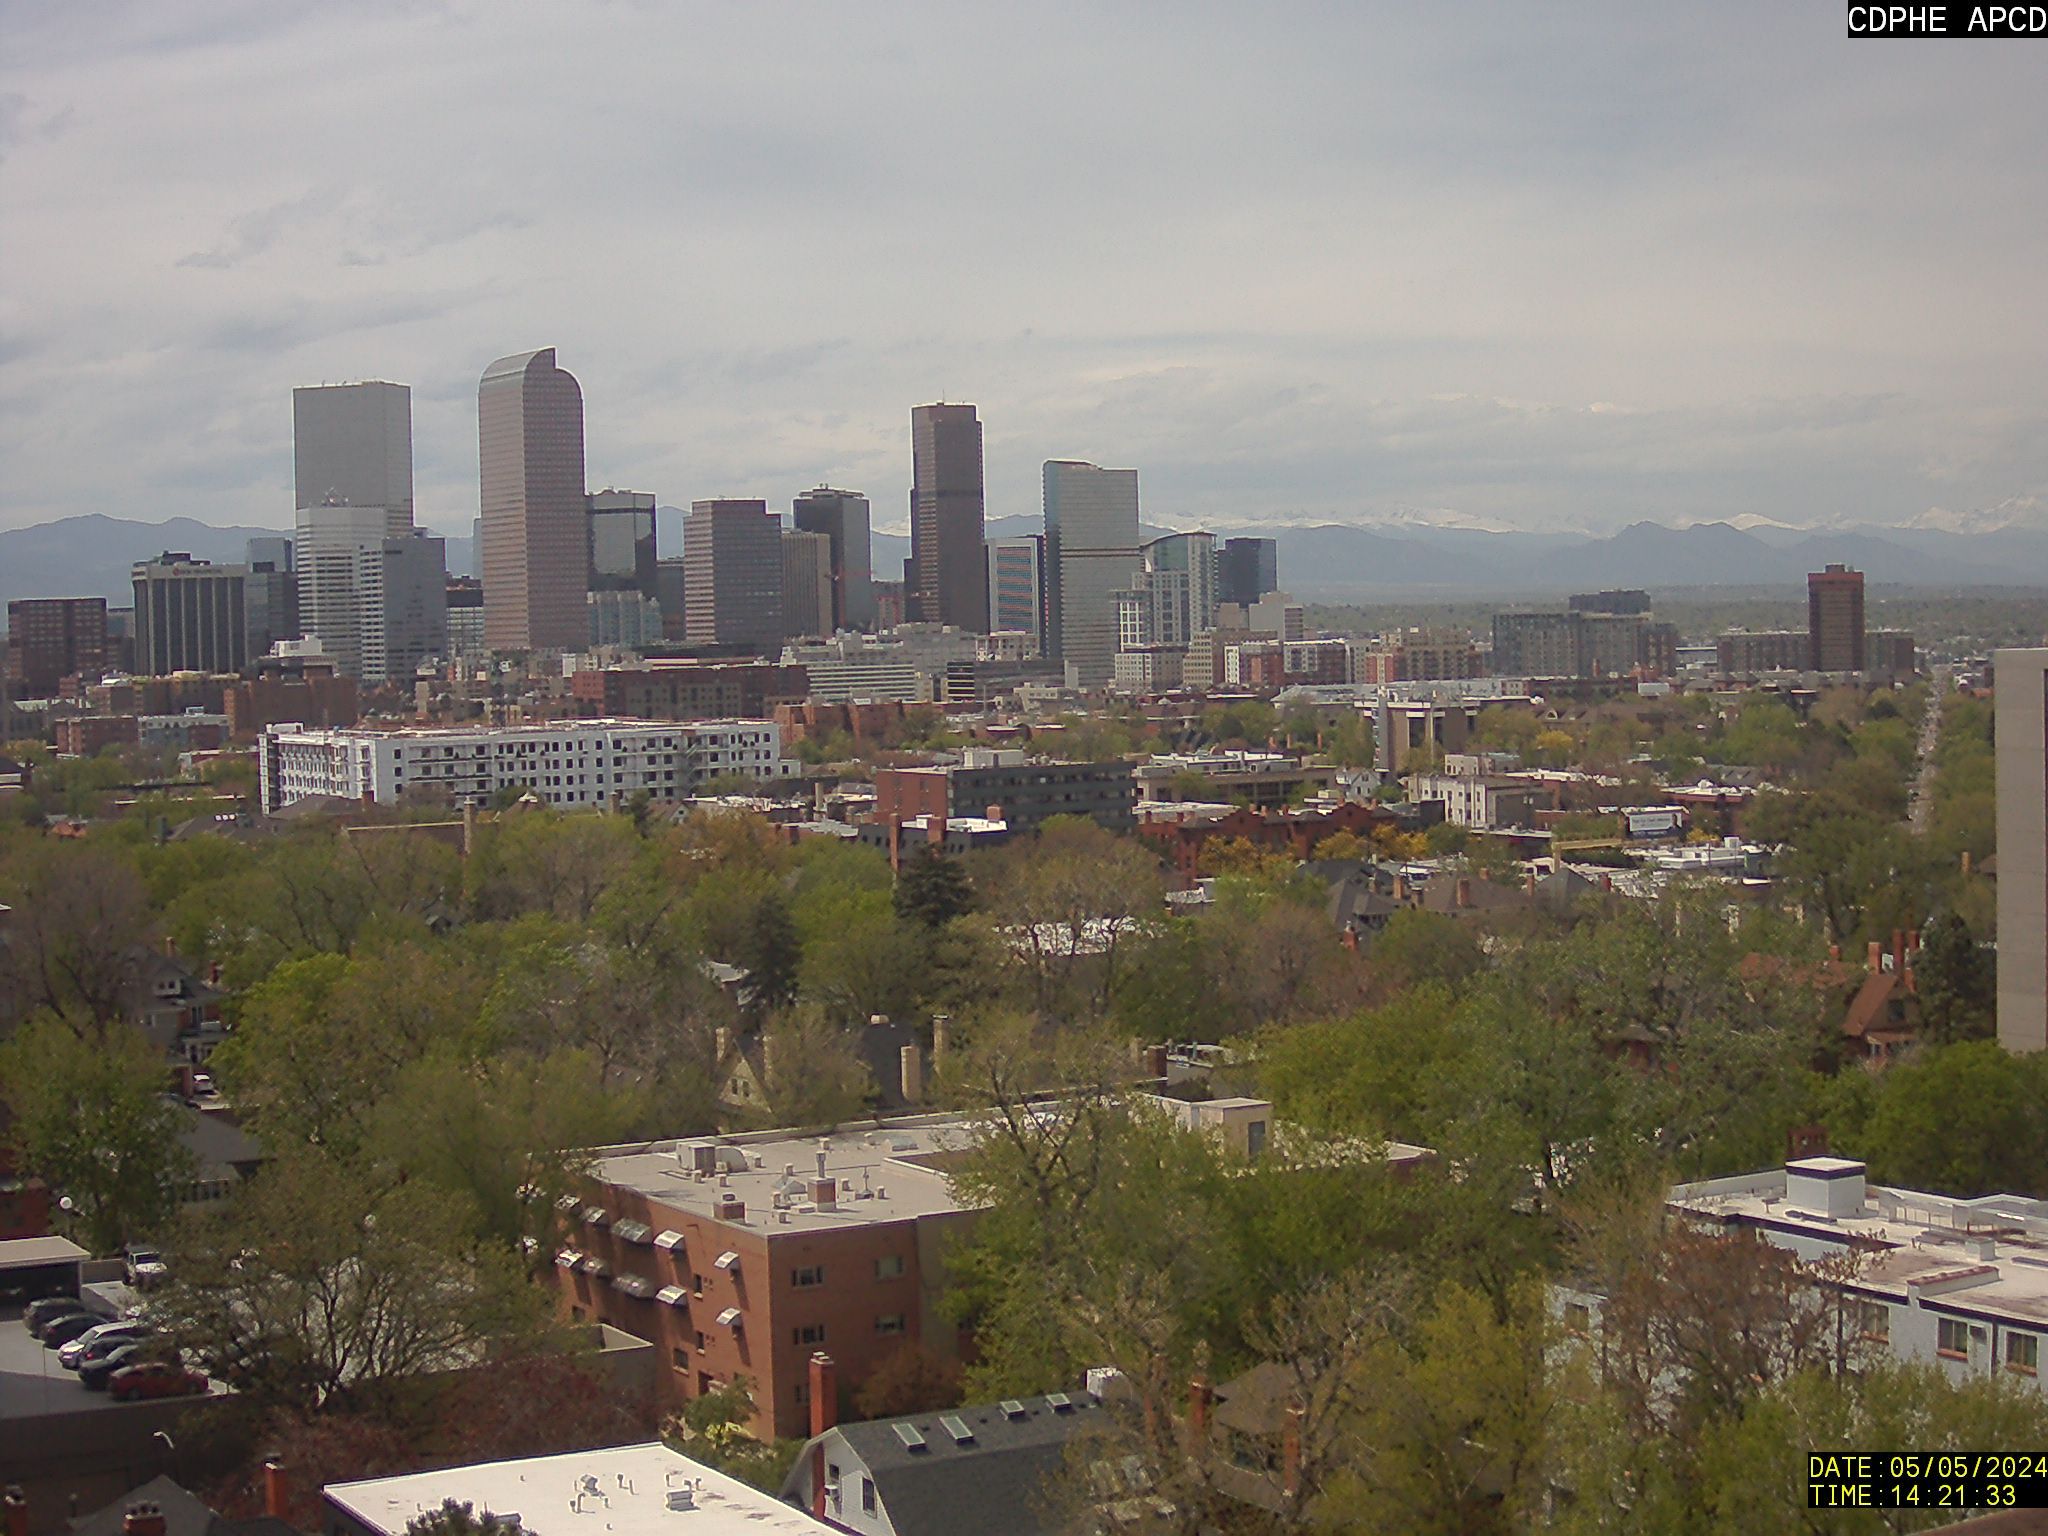 Current View of Downtown Denver